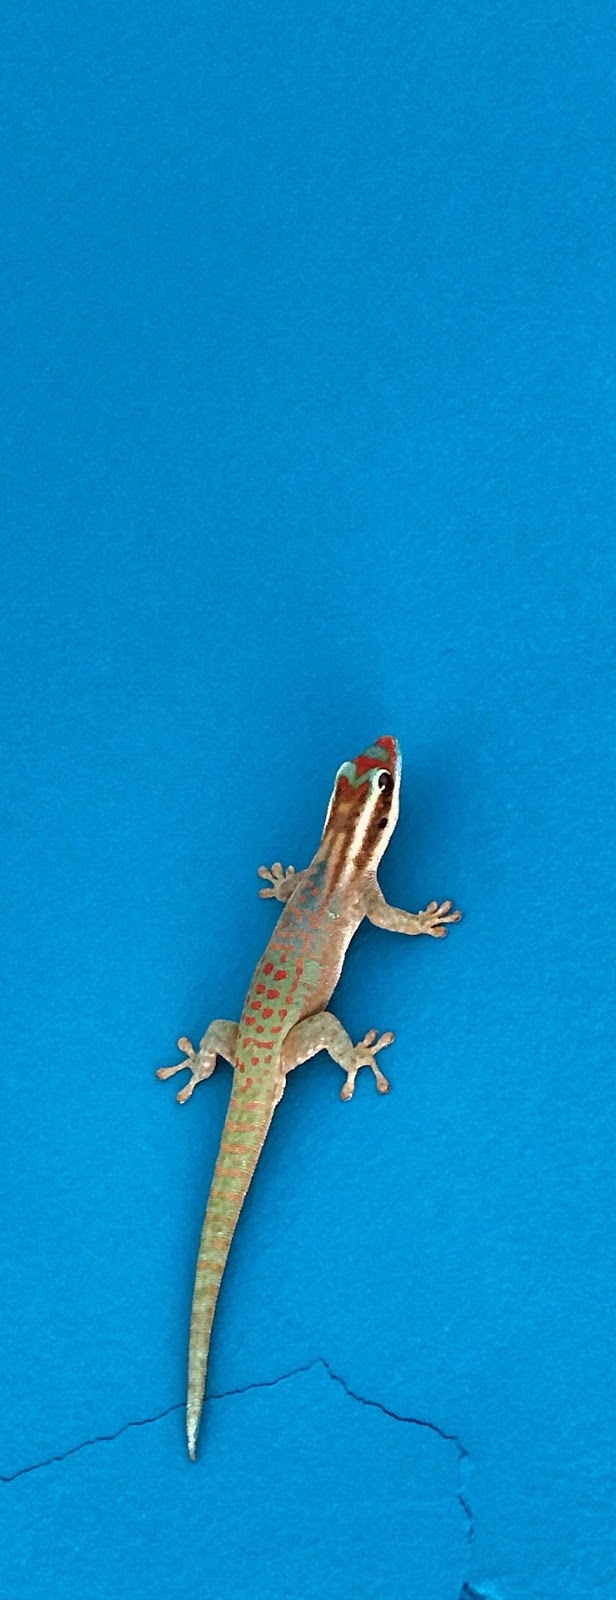 Picture of a lizard.